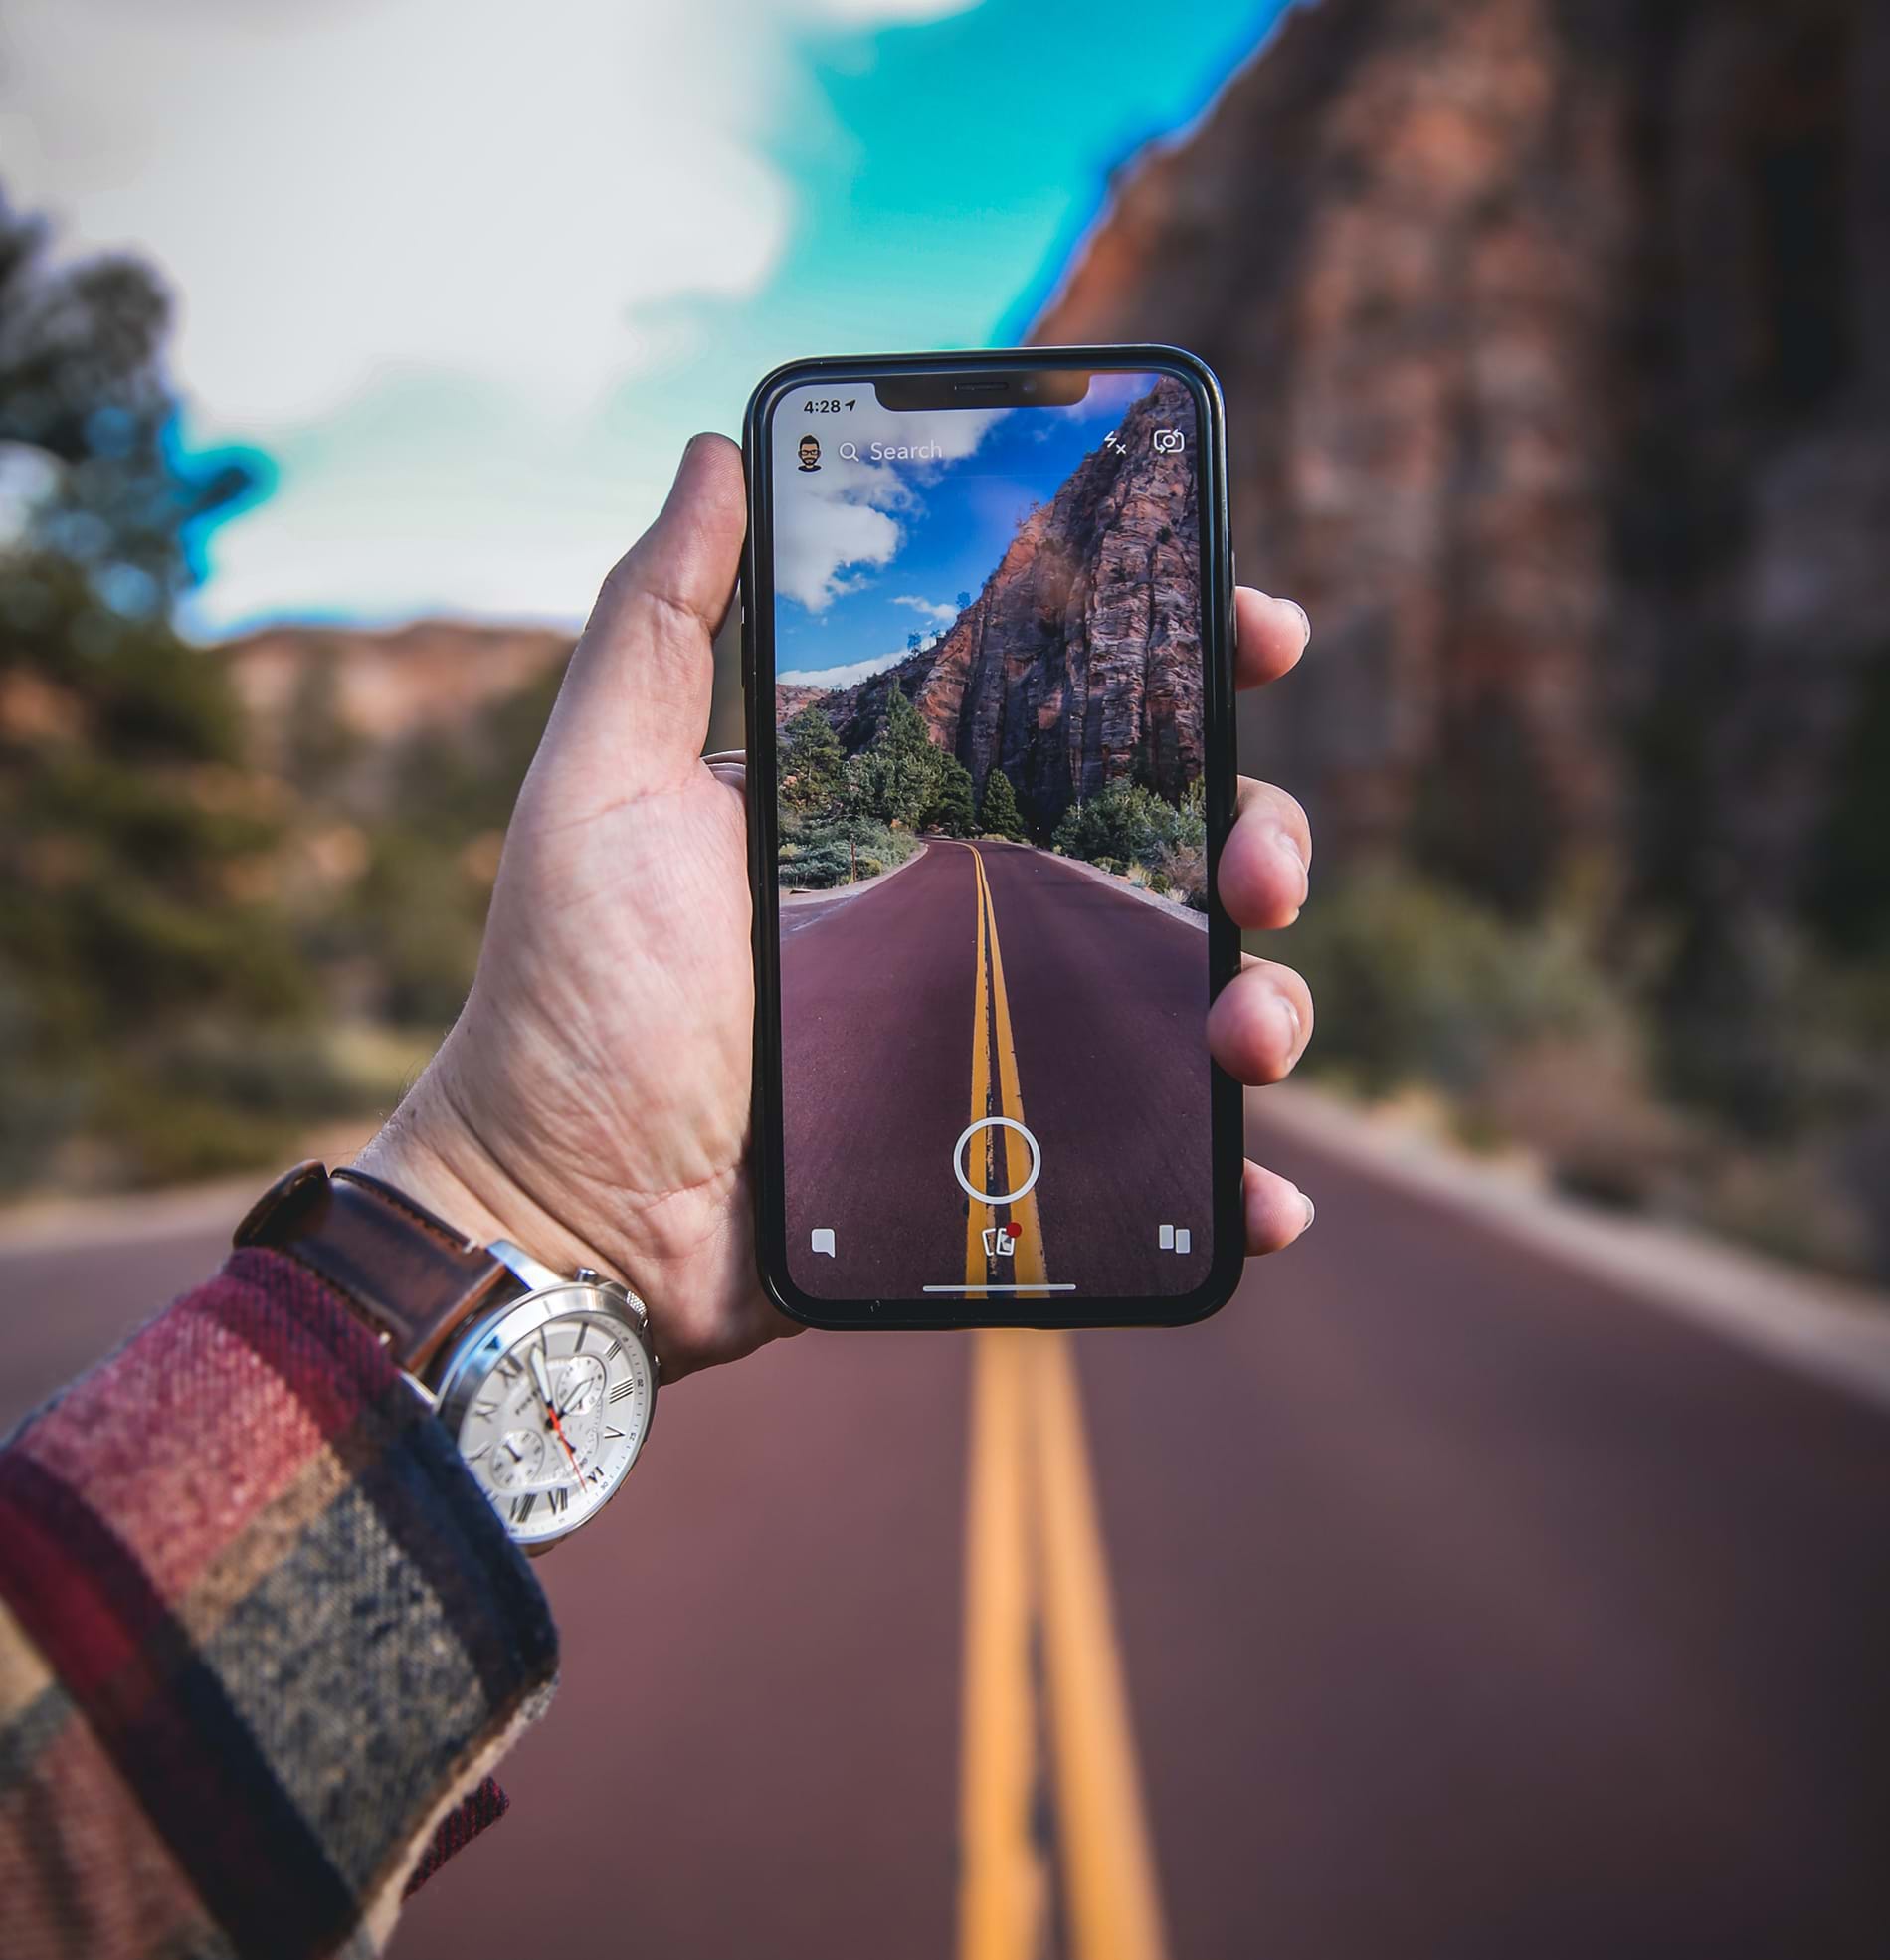 Holding phone with camera open at road ahead